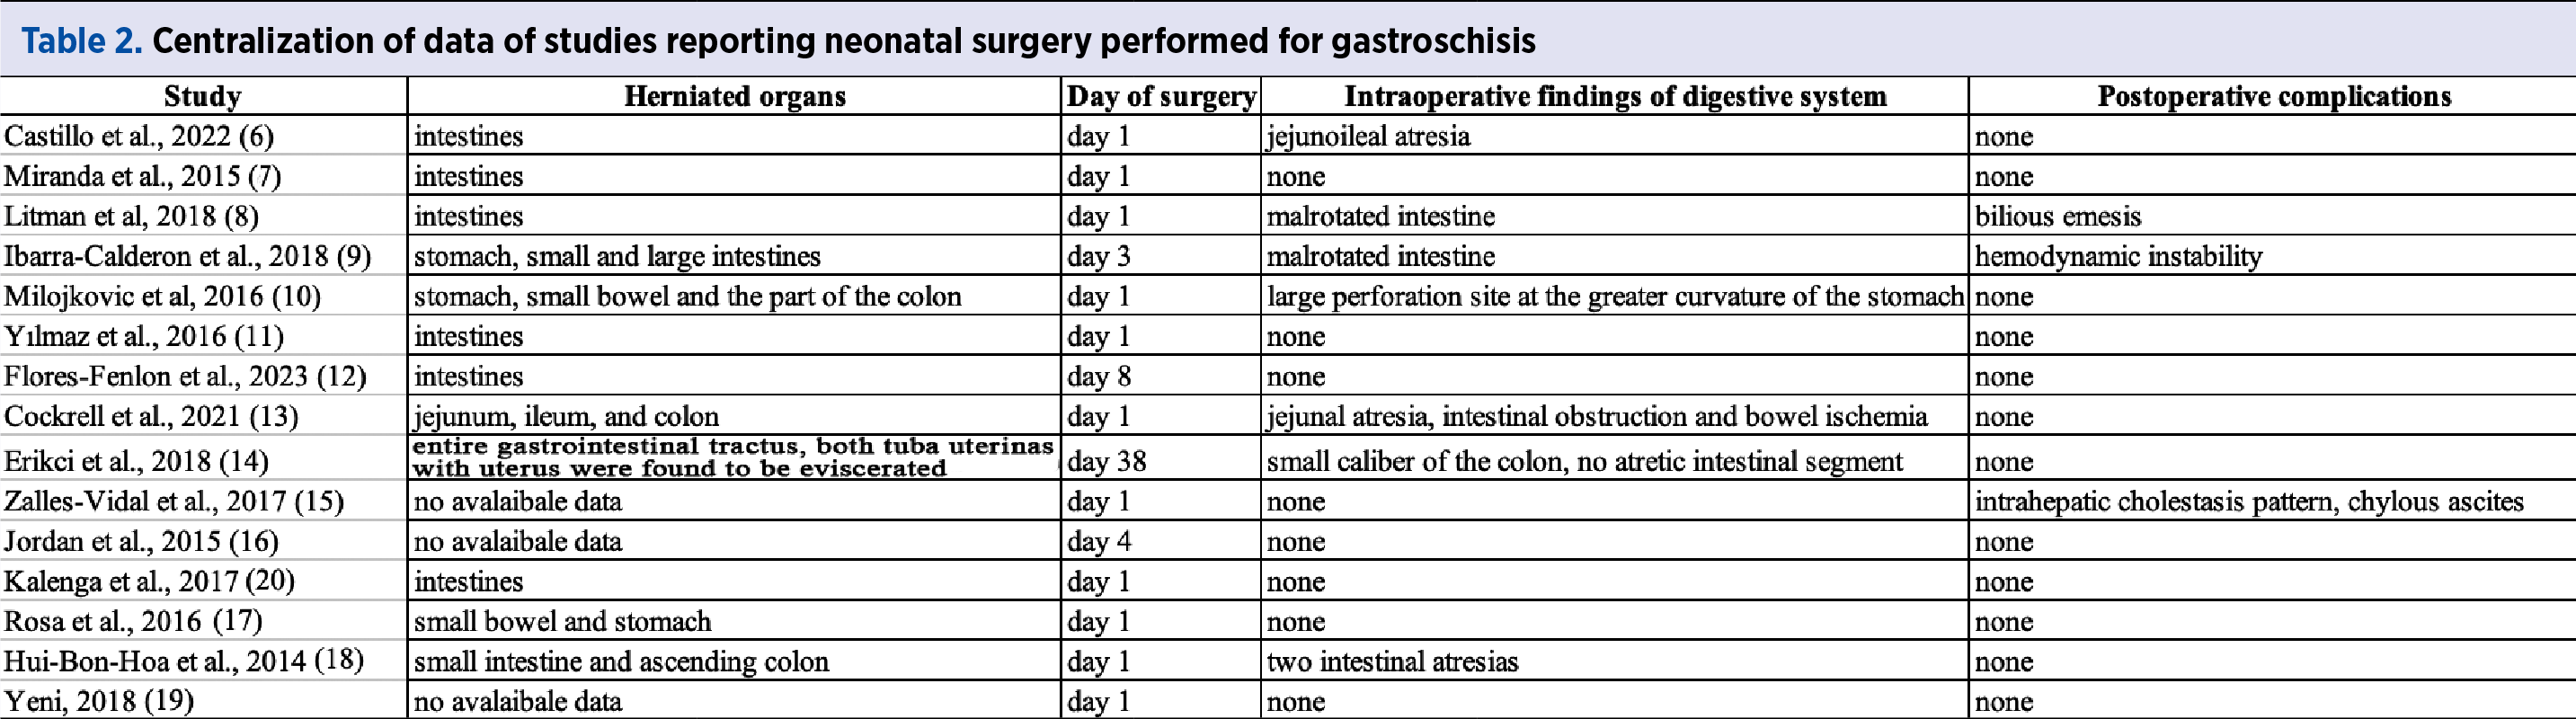 Table 2. Centralization of data of studies reporting neonatal surgery performed for gastroschisis